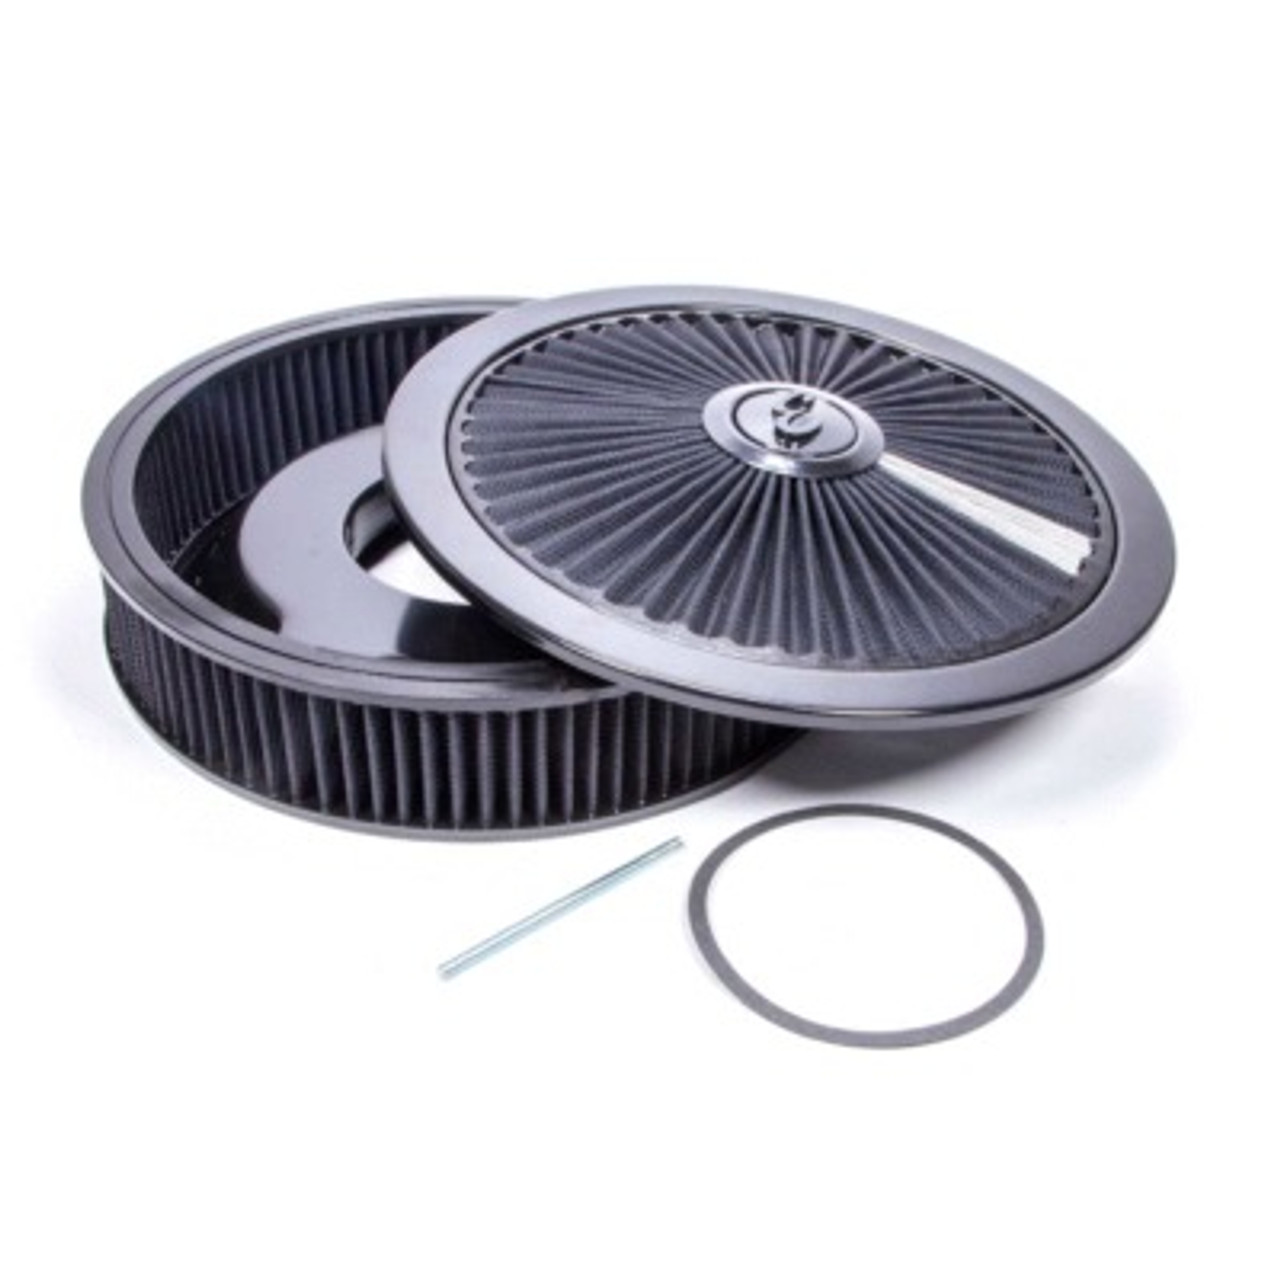 EDE43662, AIR CLEANER KIT - 14IN DIA. BREATHABLE - BLACK